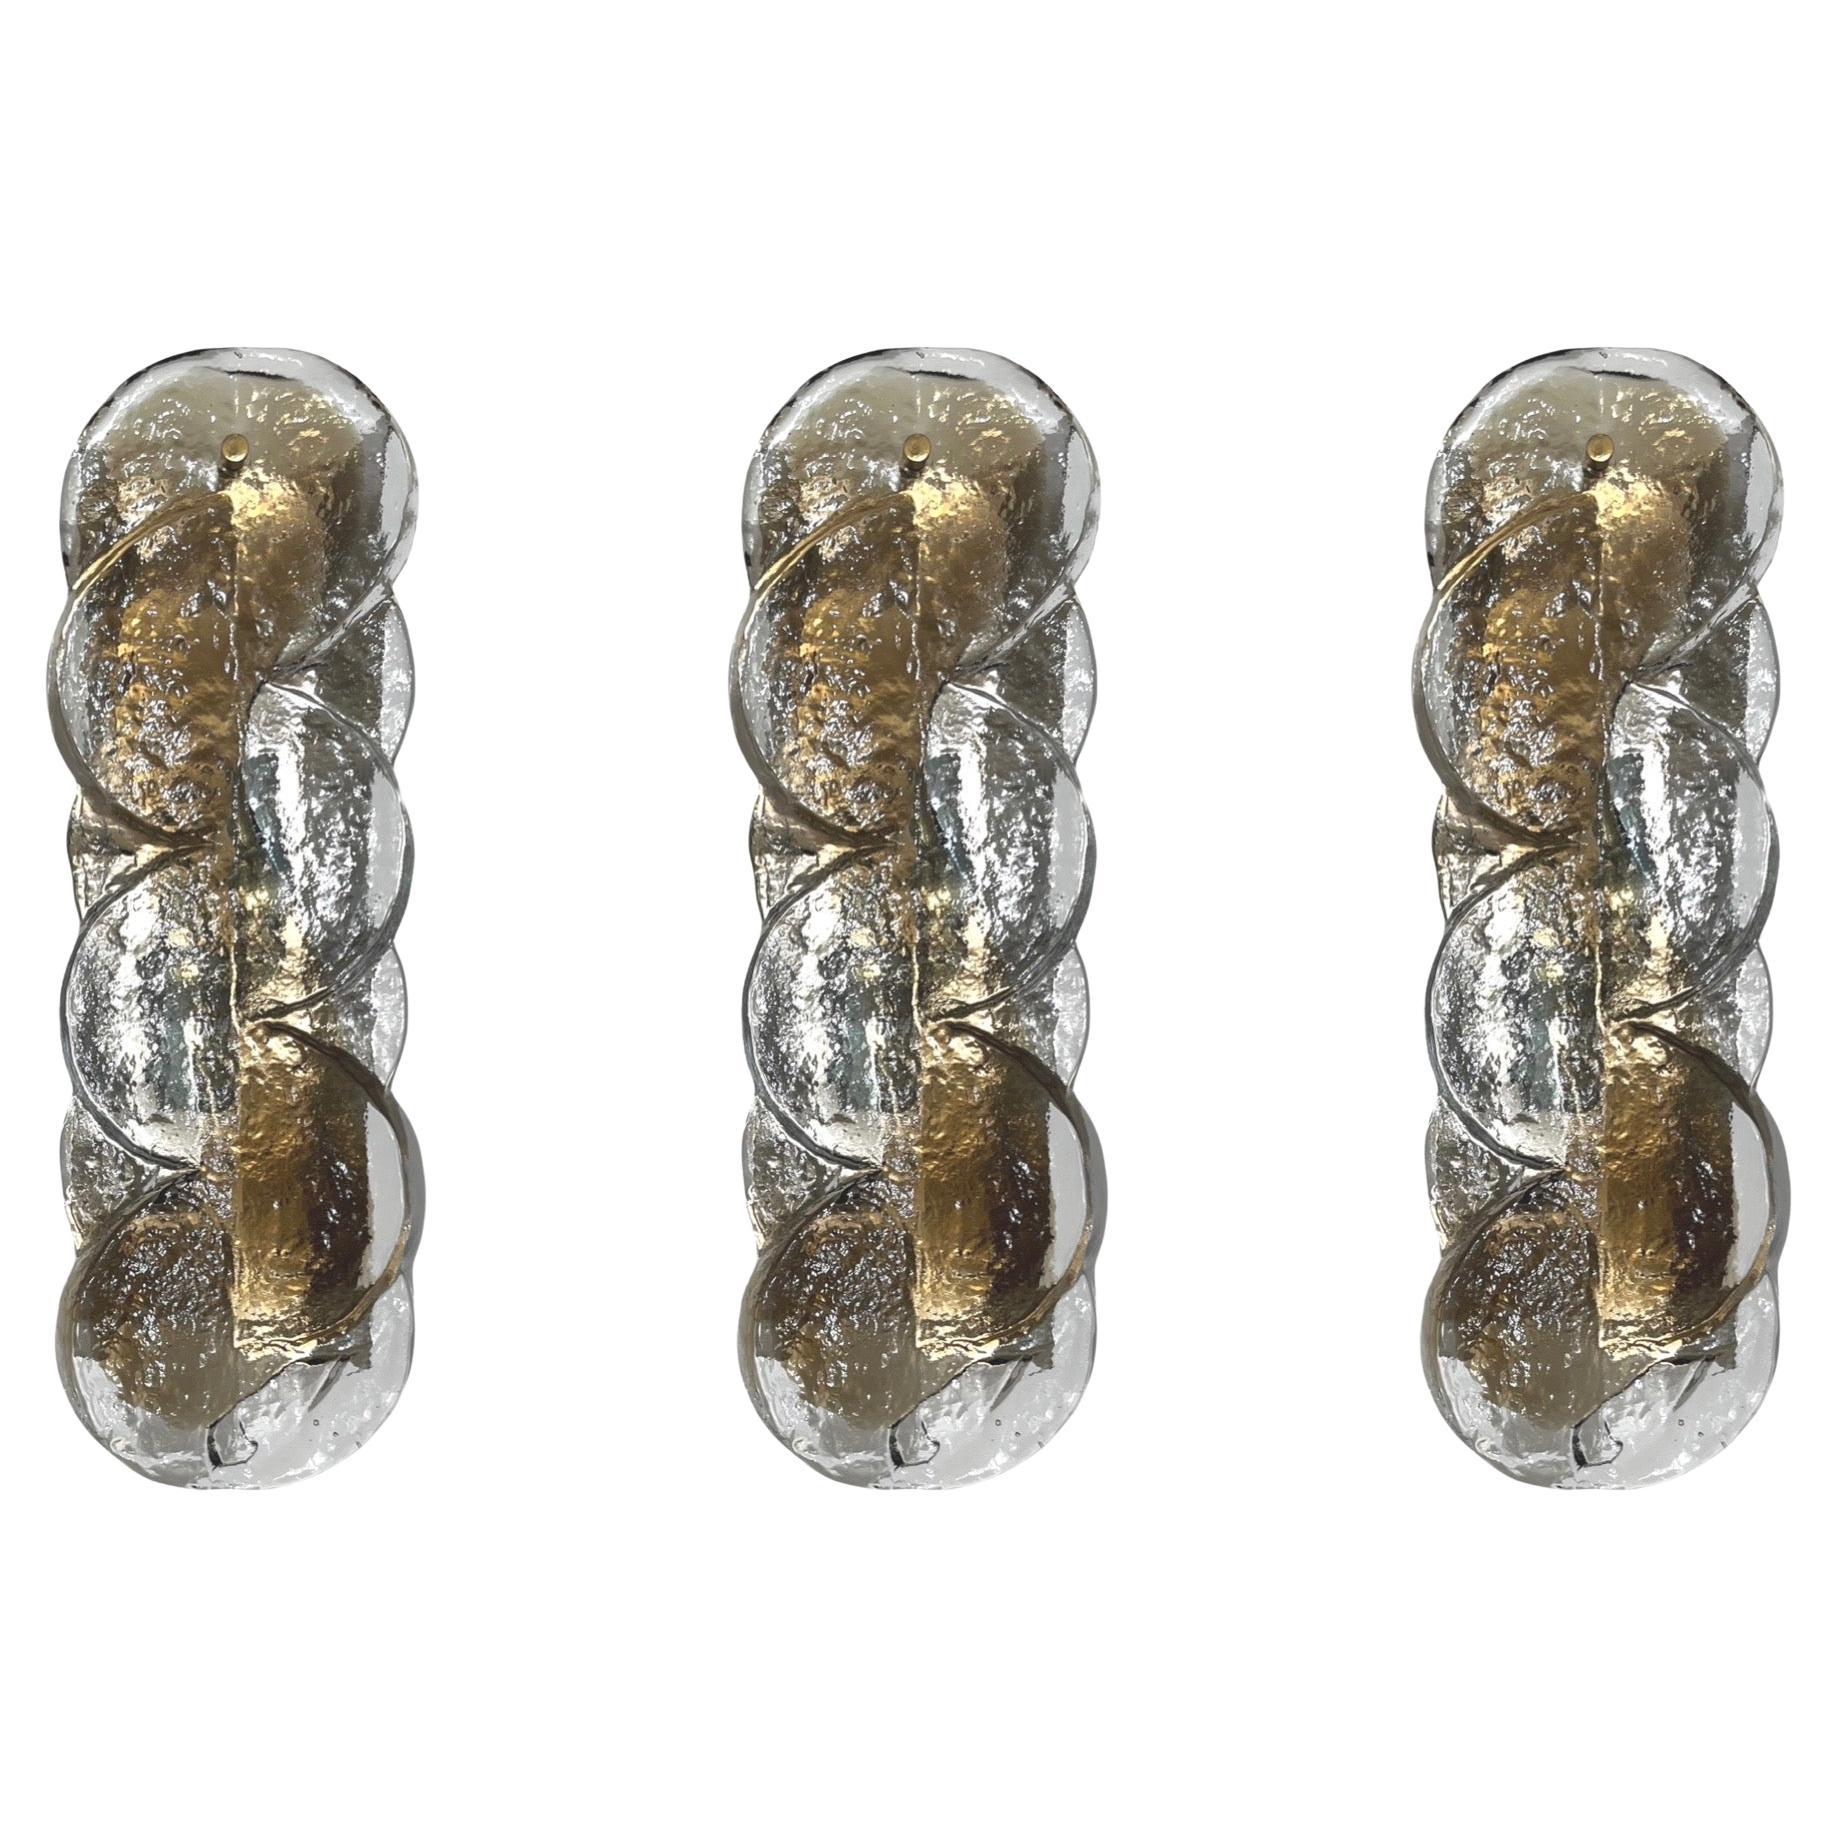 Austrian Midcentury Set of Three Murano "Citrus" Wall Sconces by Kalmar, 1970s For Sale